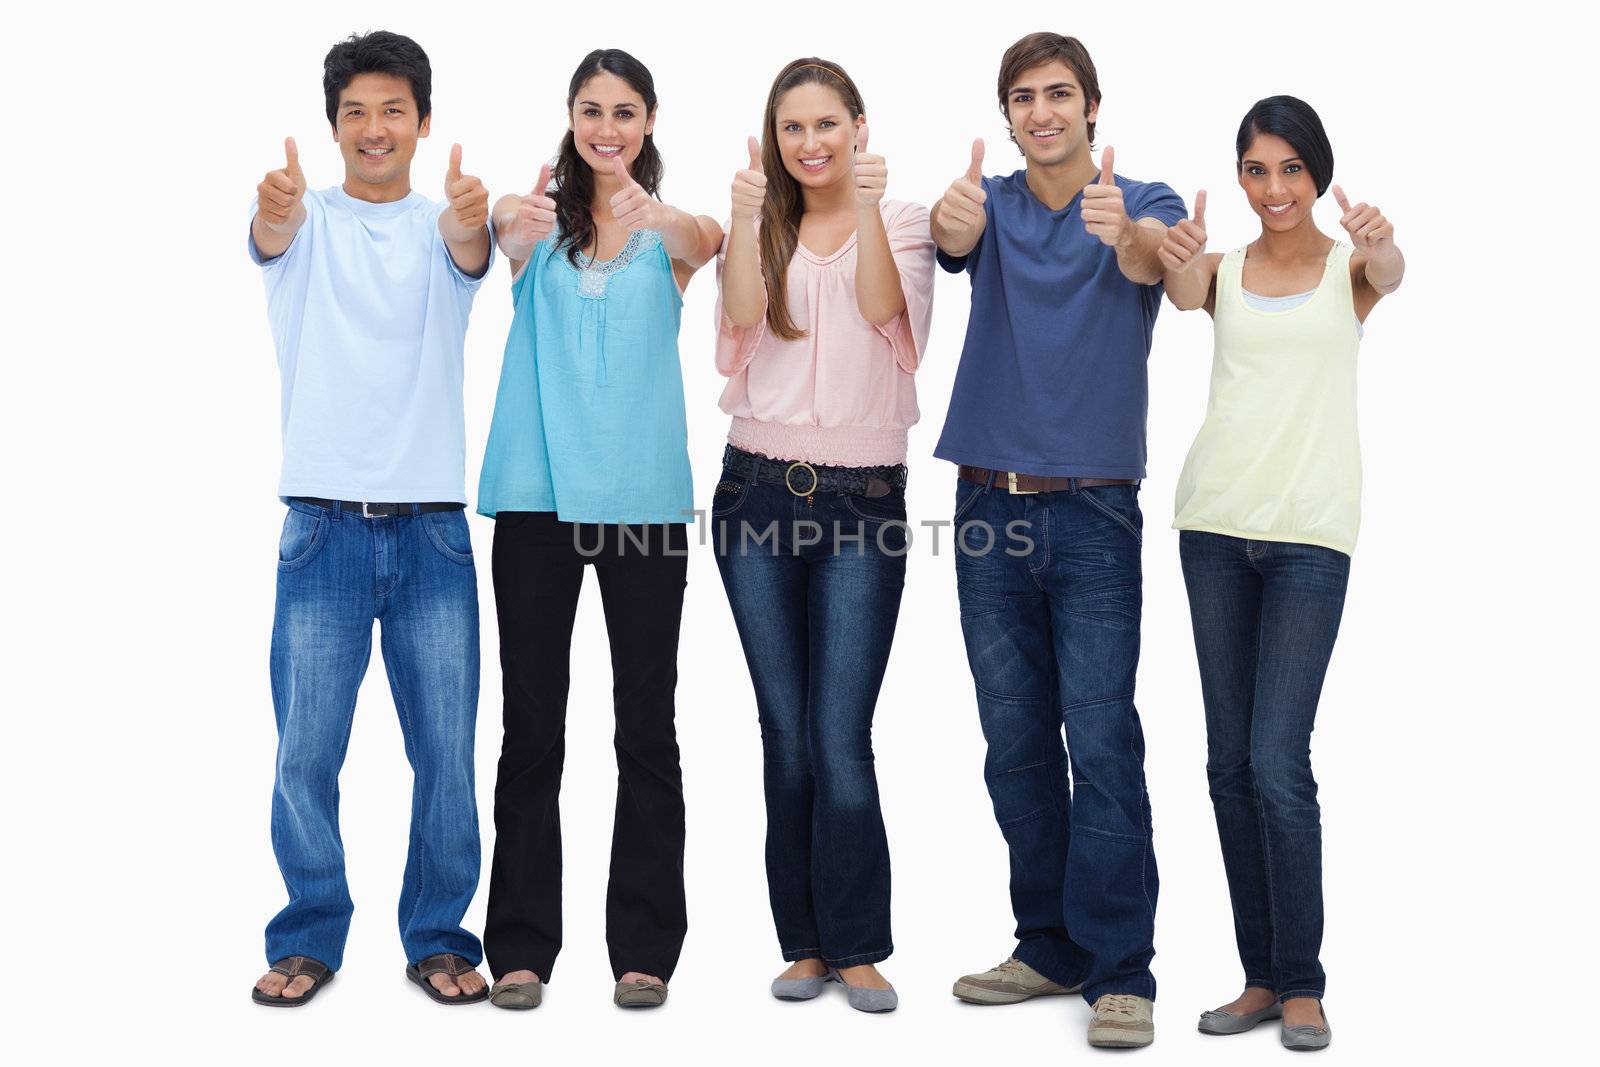 Customers approving with their thumbs-up against white background